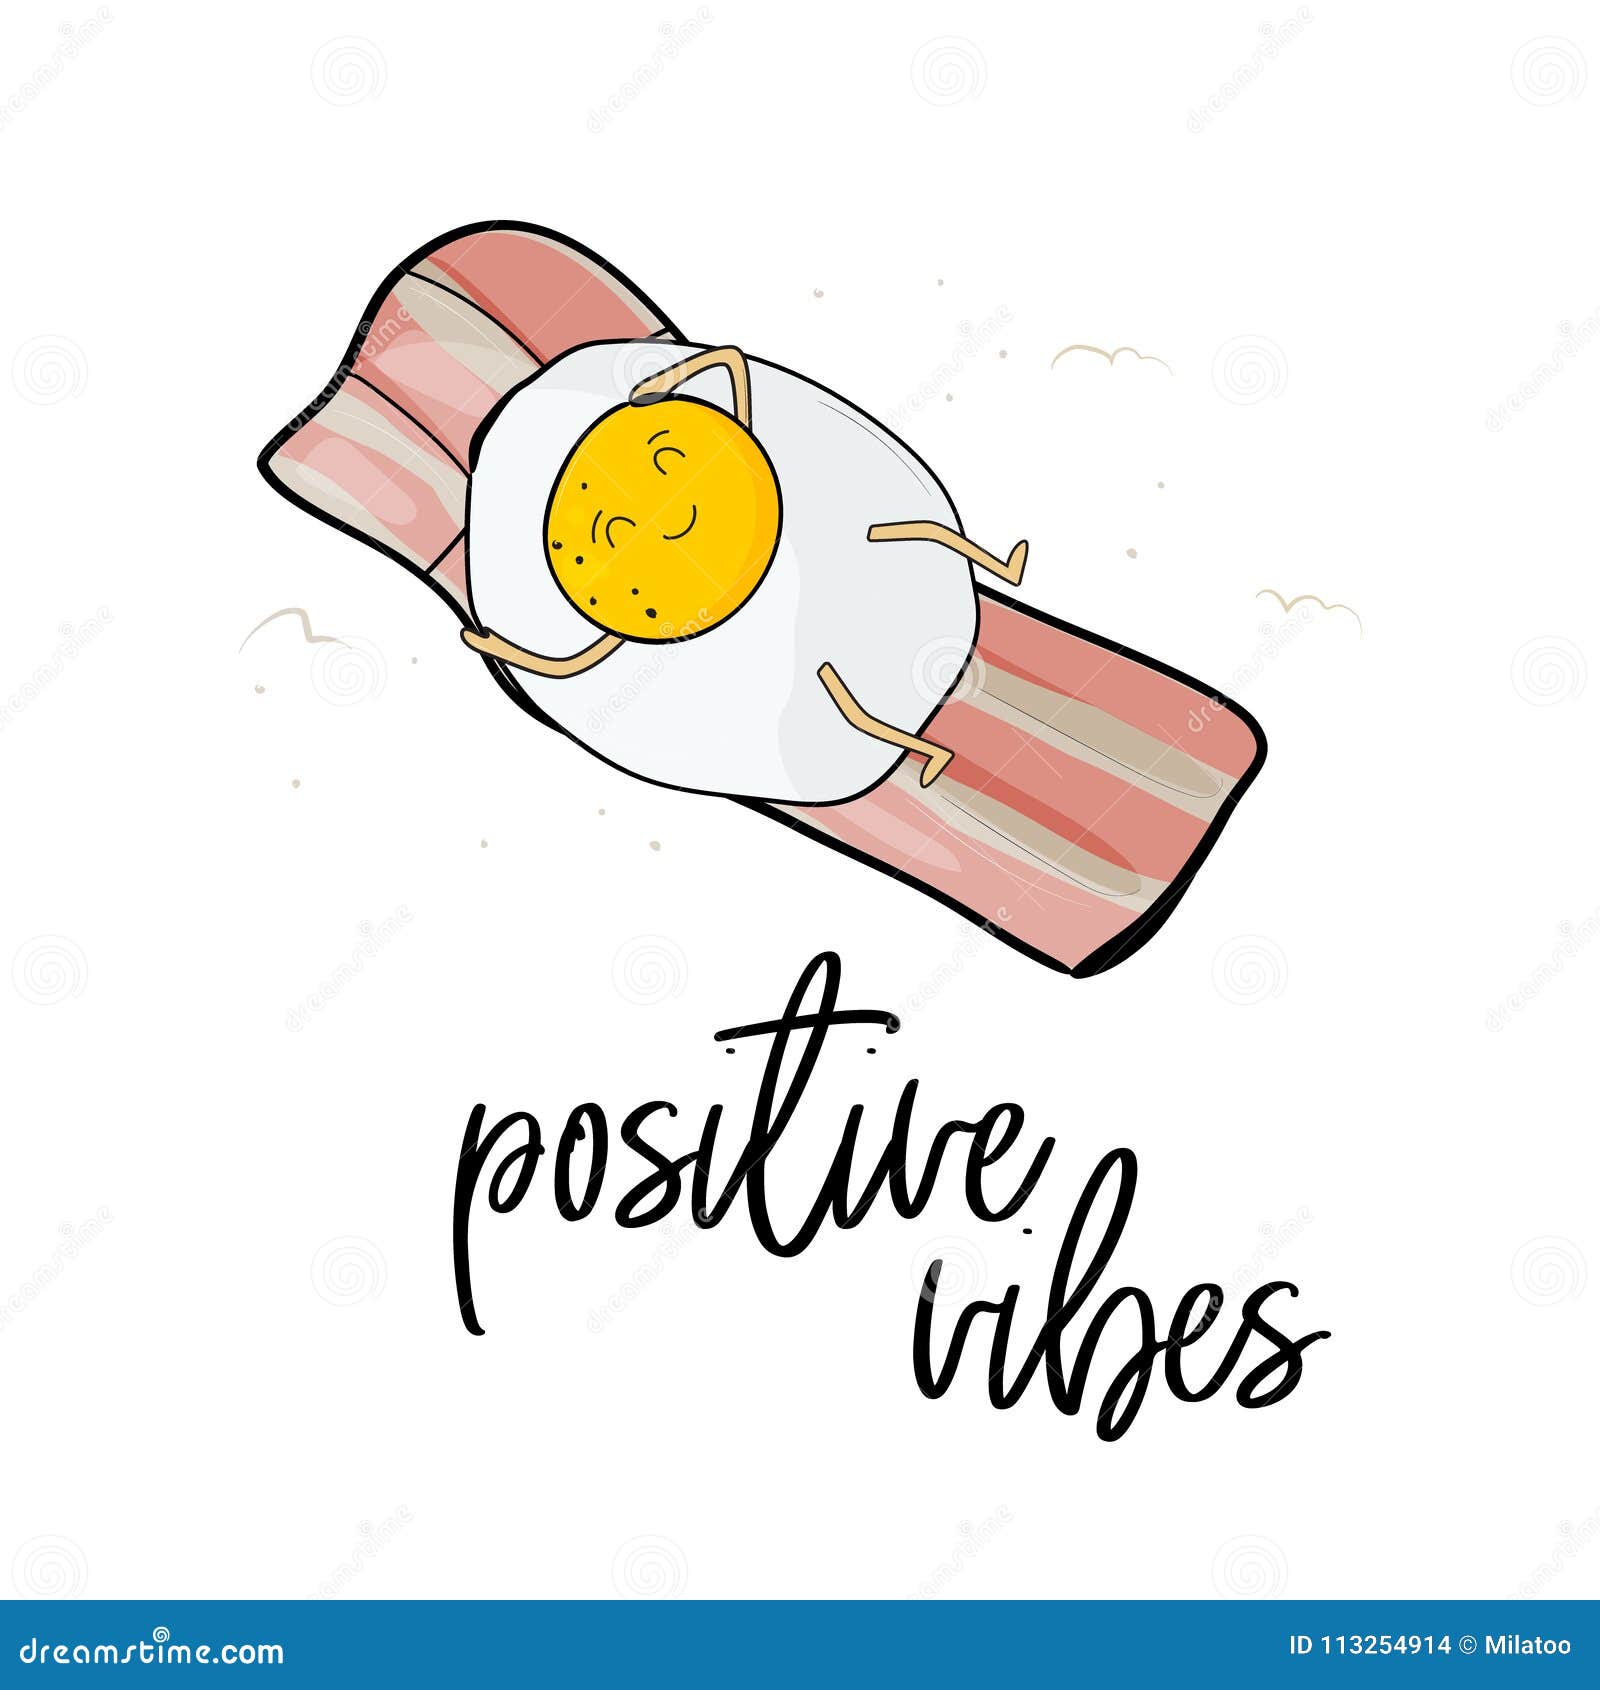 positive vibes print. cute kawaii characters.  . cartoon style. funny pun quote. egg on bacon tanning. cool mod